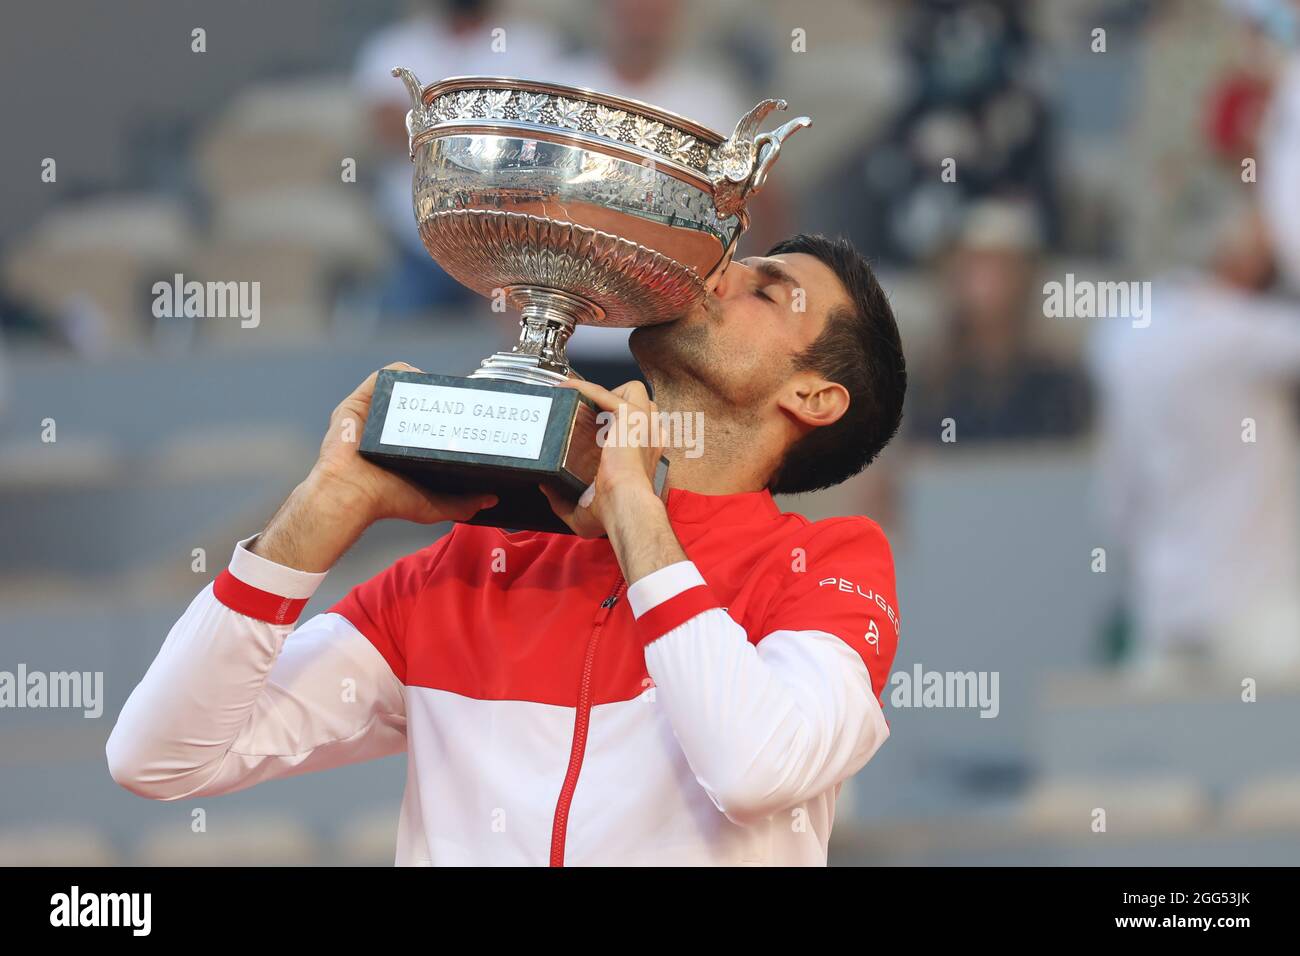 Player Of Kiss High Resolution Stock Photography and Images - Alamy